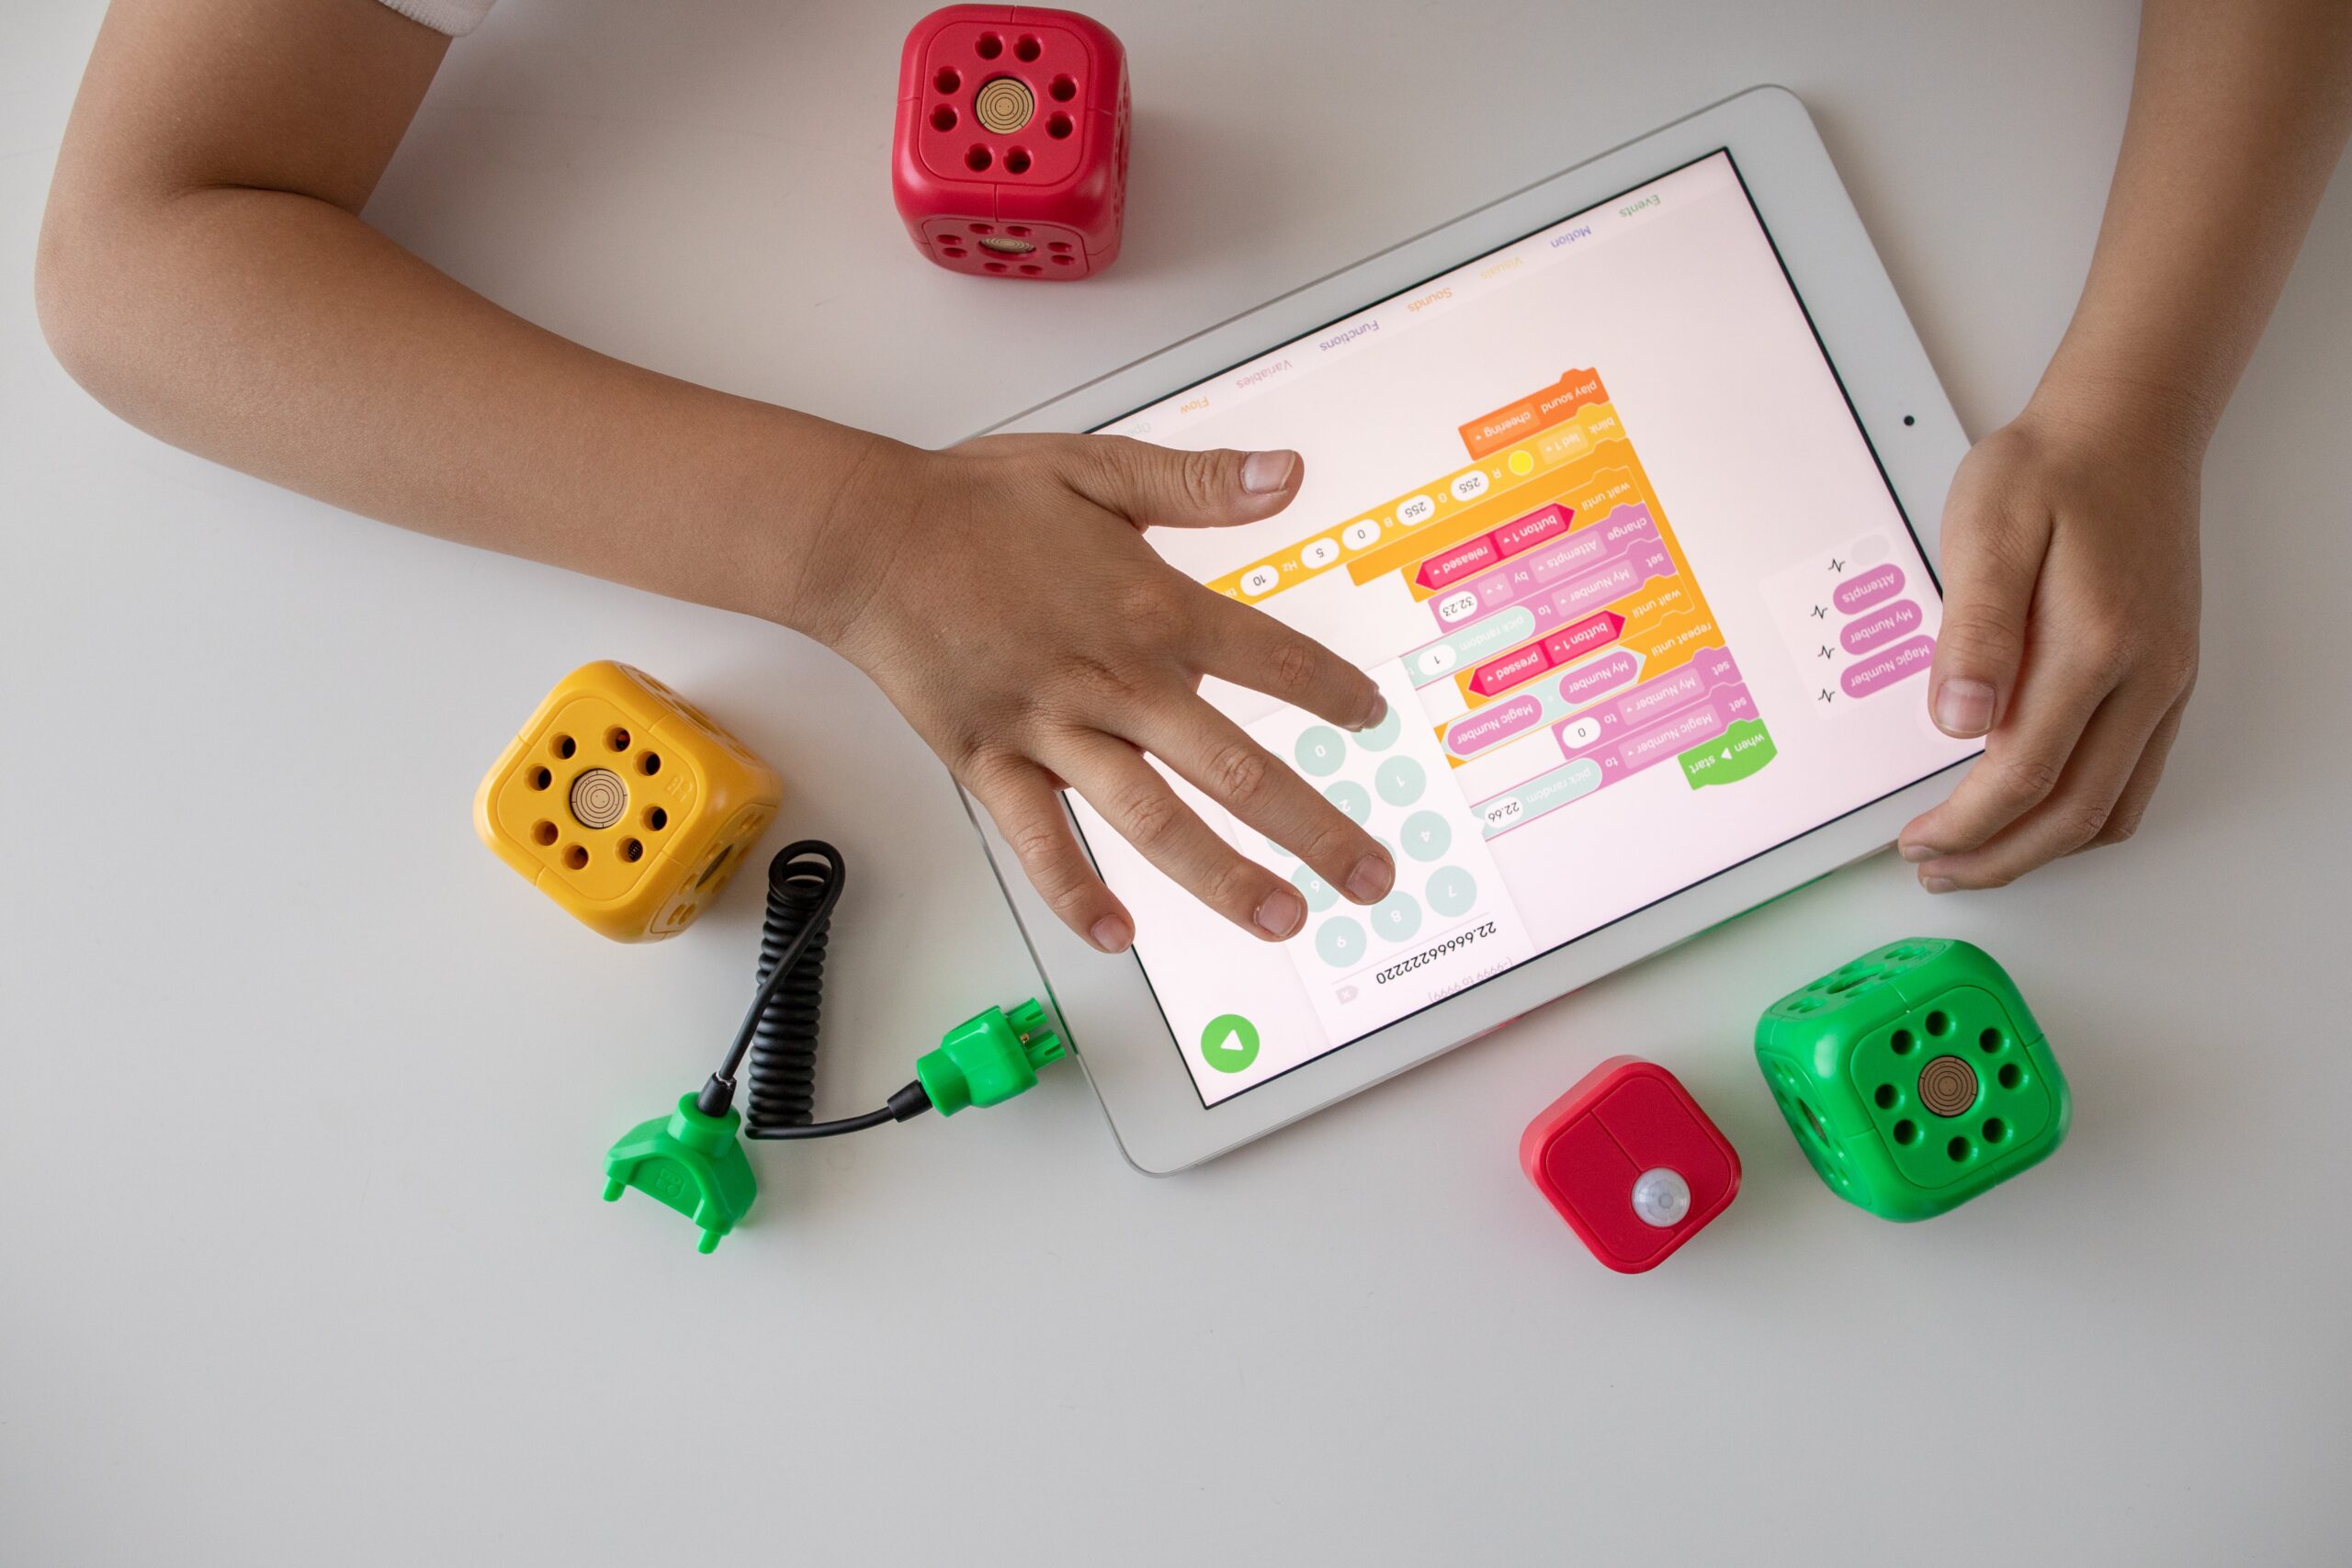 How Gadgets (and Schools) are Wrecking Kids’ Learning Abilities